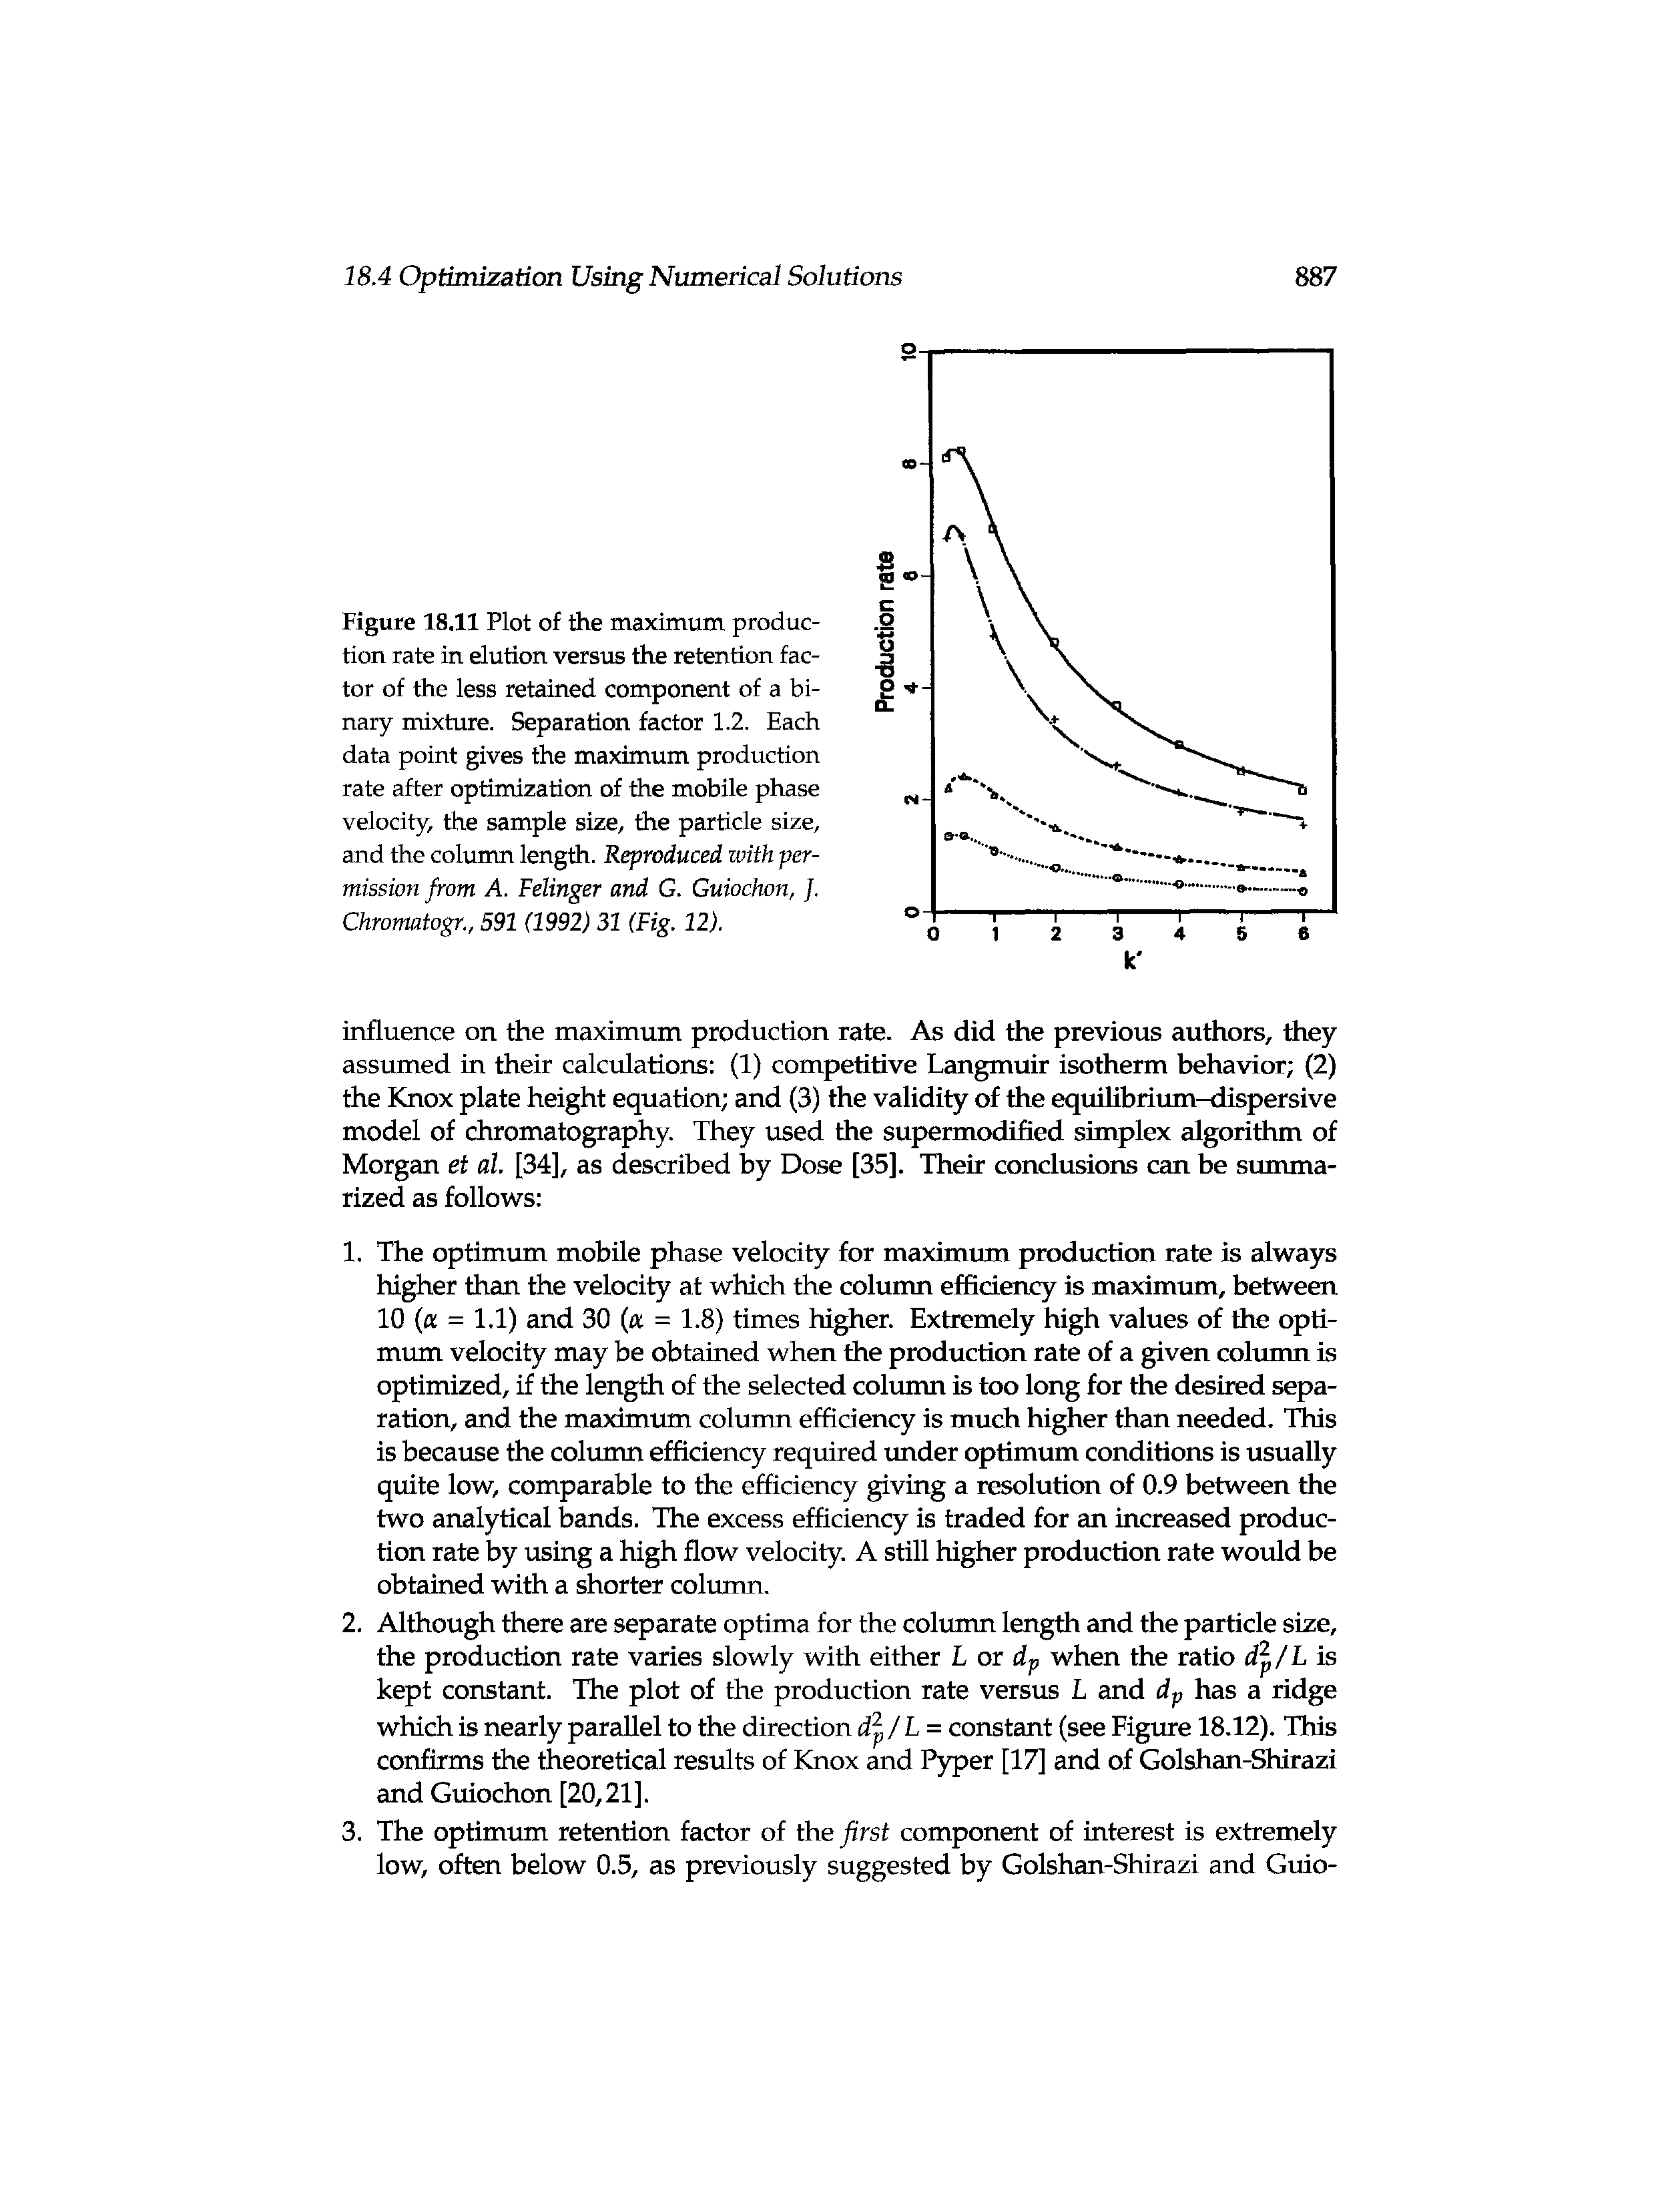 Figure 18.11 Plot of the maximum production rate in elution versus the retention factor of the less retained component of a binary mixture. Separation factor 1.2. Each data point gives the maximum production rate after optimization of the mobile phase velocity, the sample size, the particle size, and the column length. Reproduced with permission from A. Felinger and G. Guiochon,. Chromatogr., 591 (1992) 31 (Fig. 12).